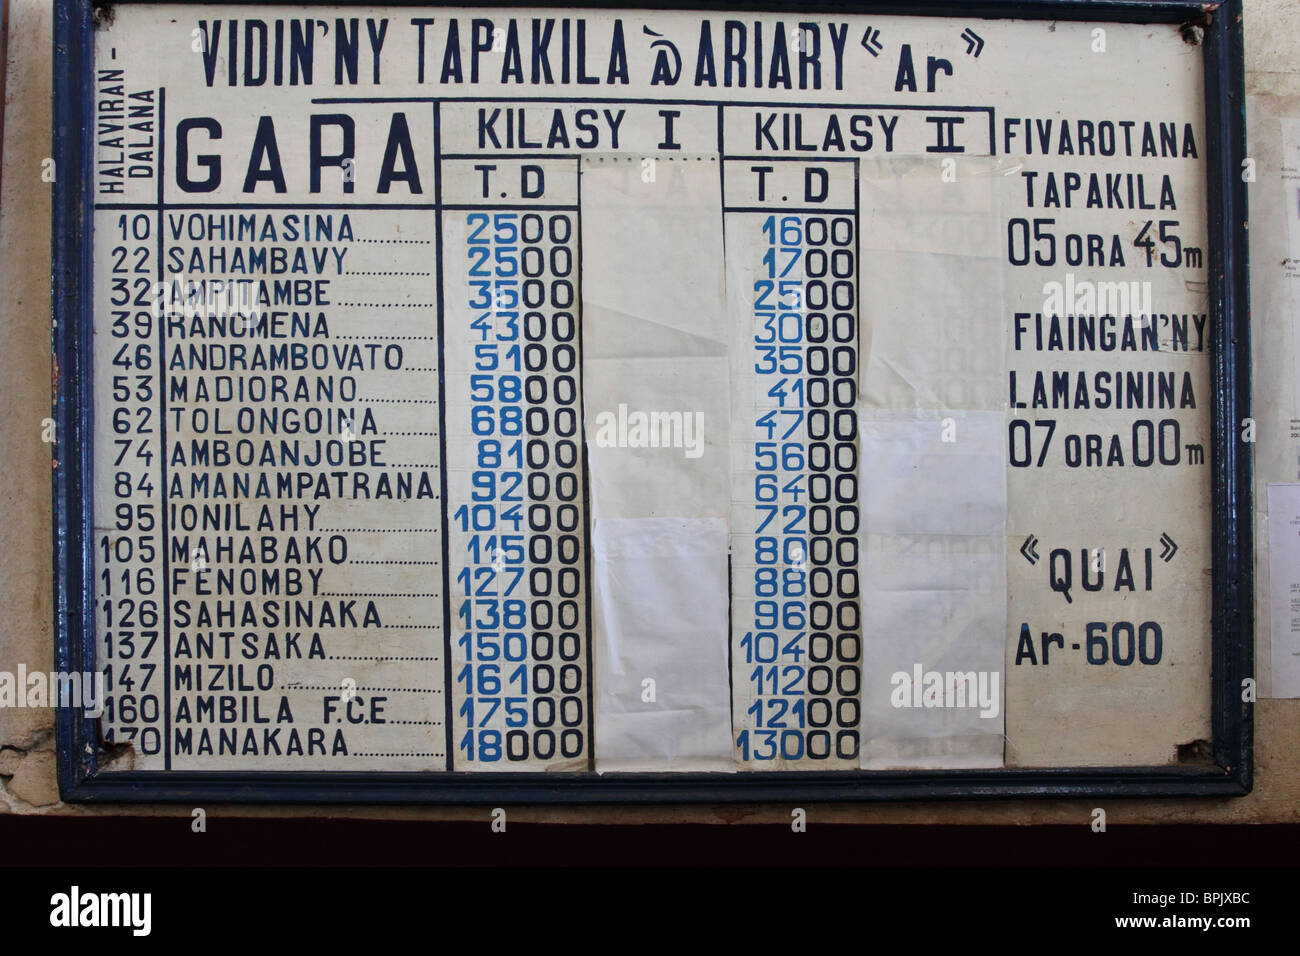 Board showing the stations and prices of the train journey between Manakara and Fianarantsoa, Madagascar. Stock Photo